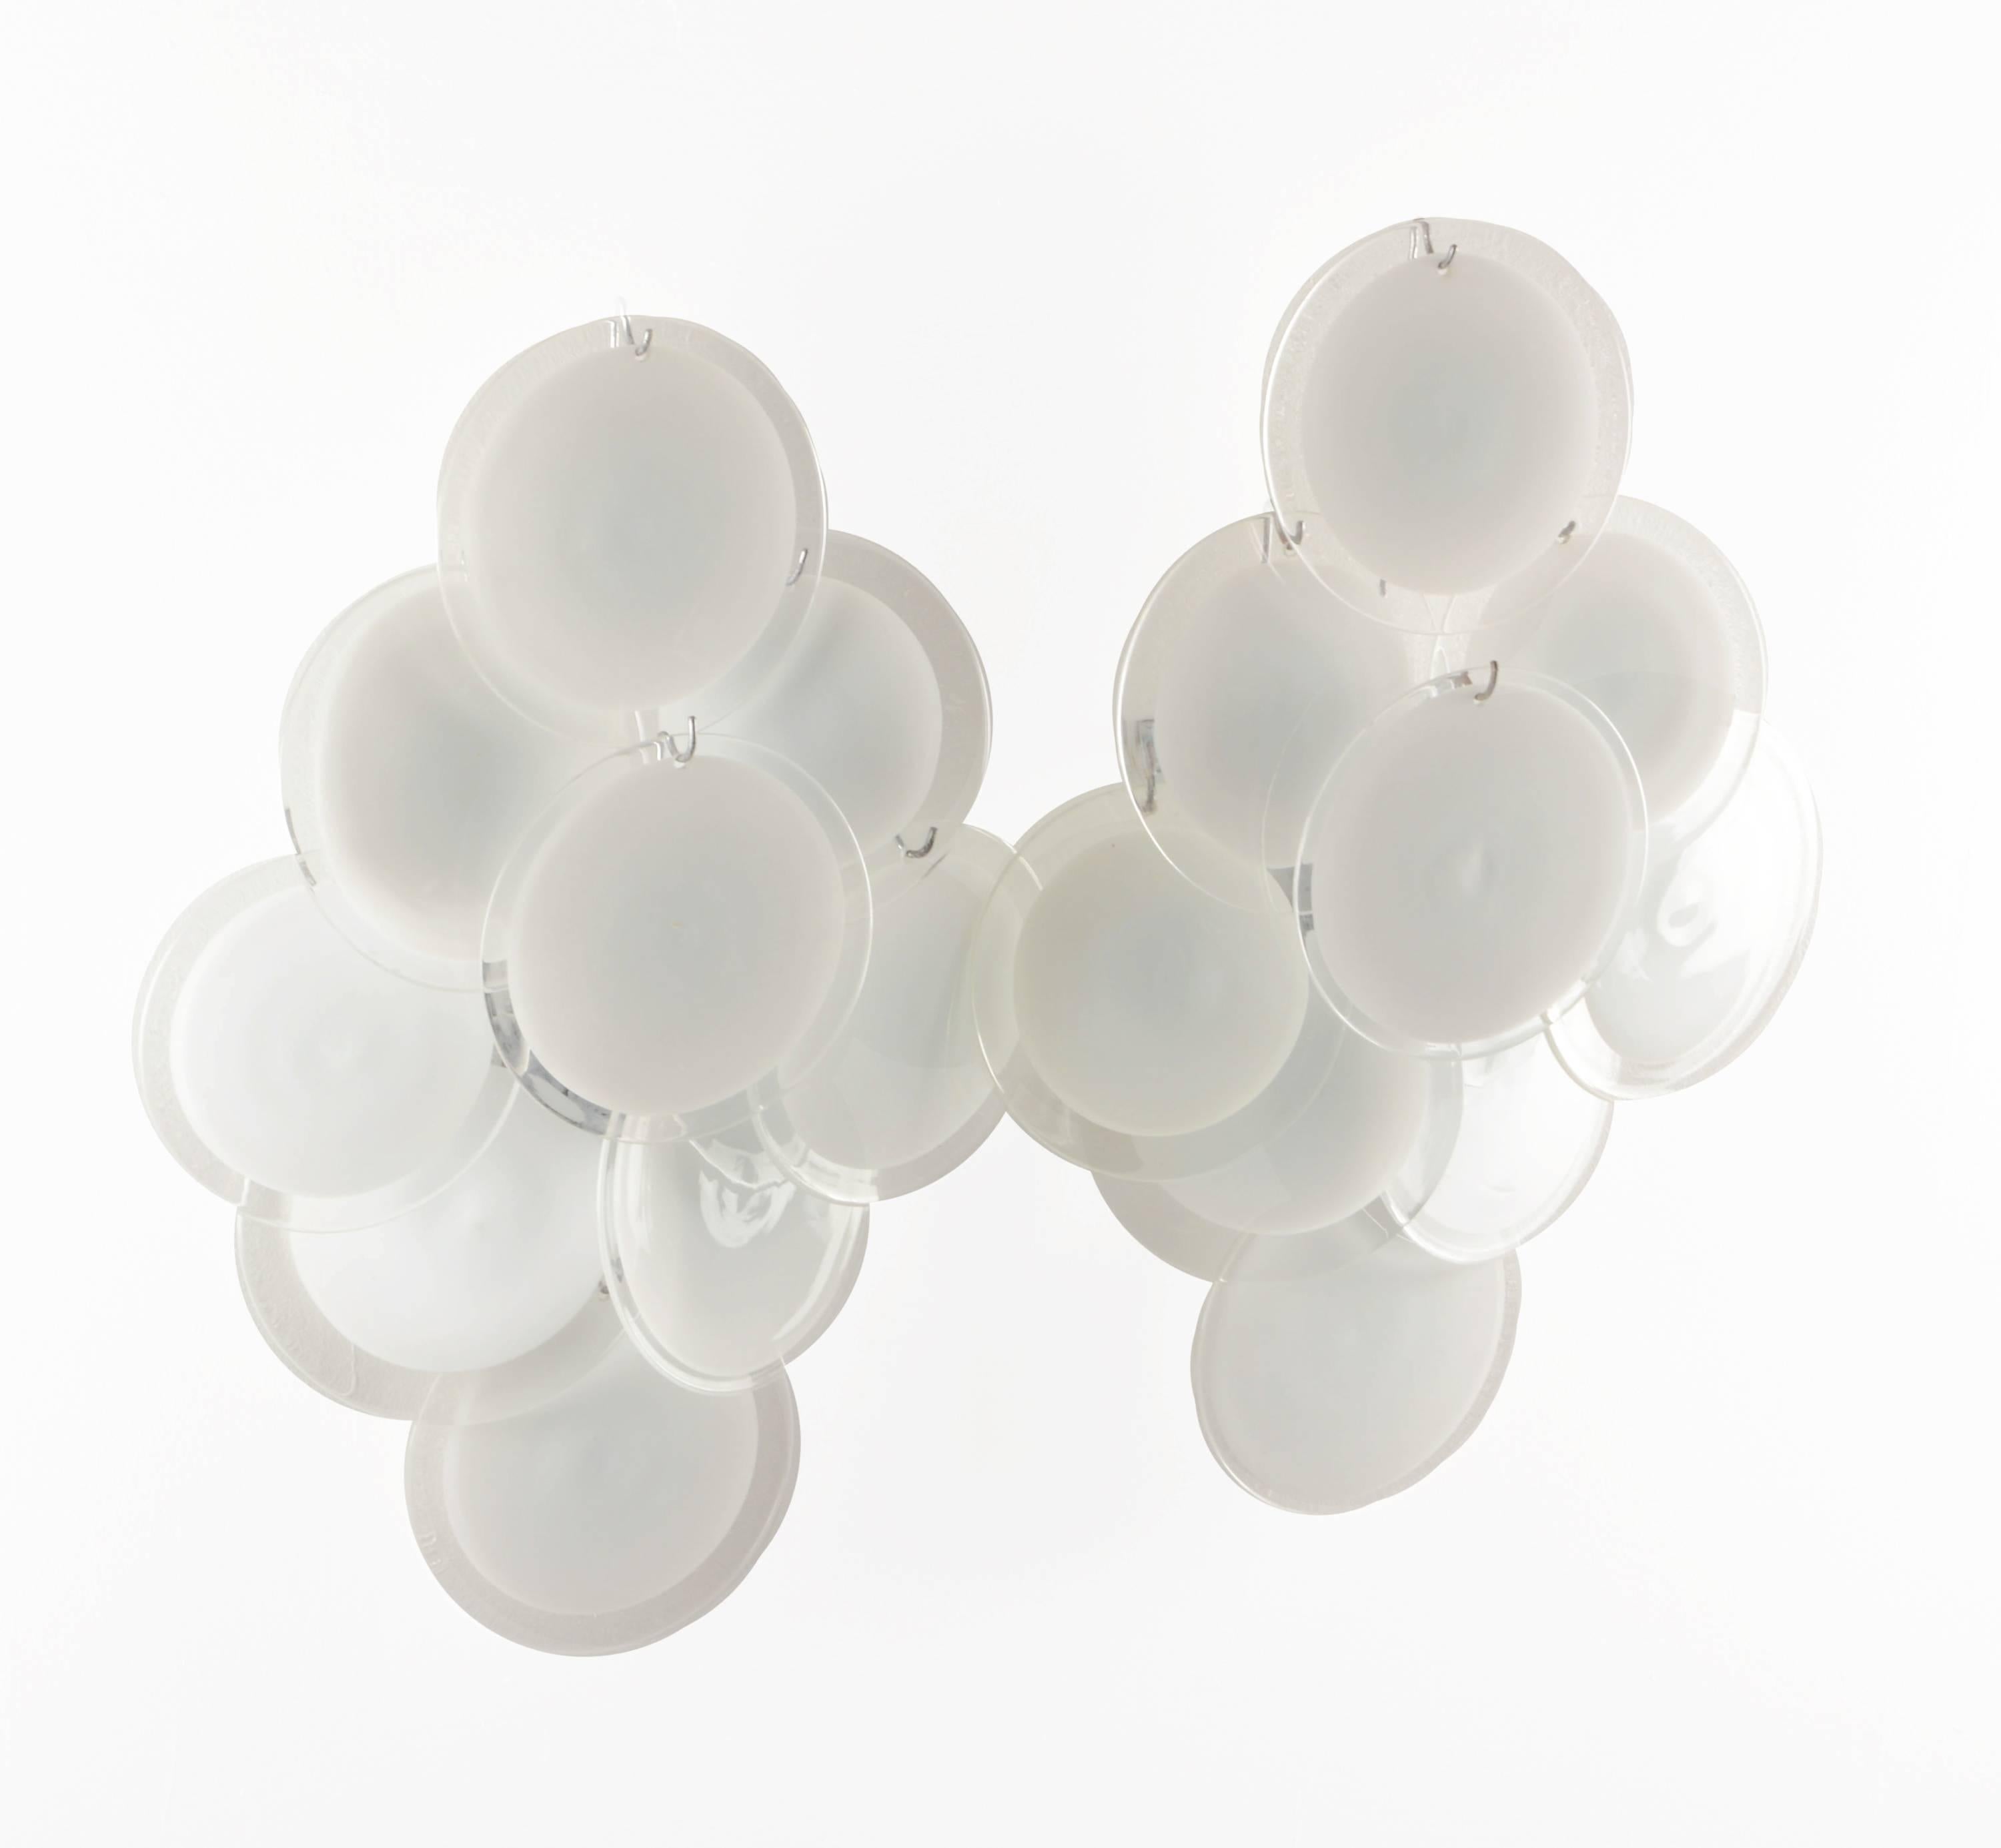 Pair of extra large wall lamps by Vistosi. Each sconce has nine pieces of glass discs of slightly various size and execution since they are handmade. The glass discs will display different ratio of white and clear glass. Excellent condition and